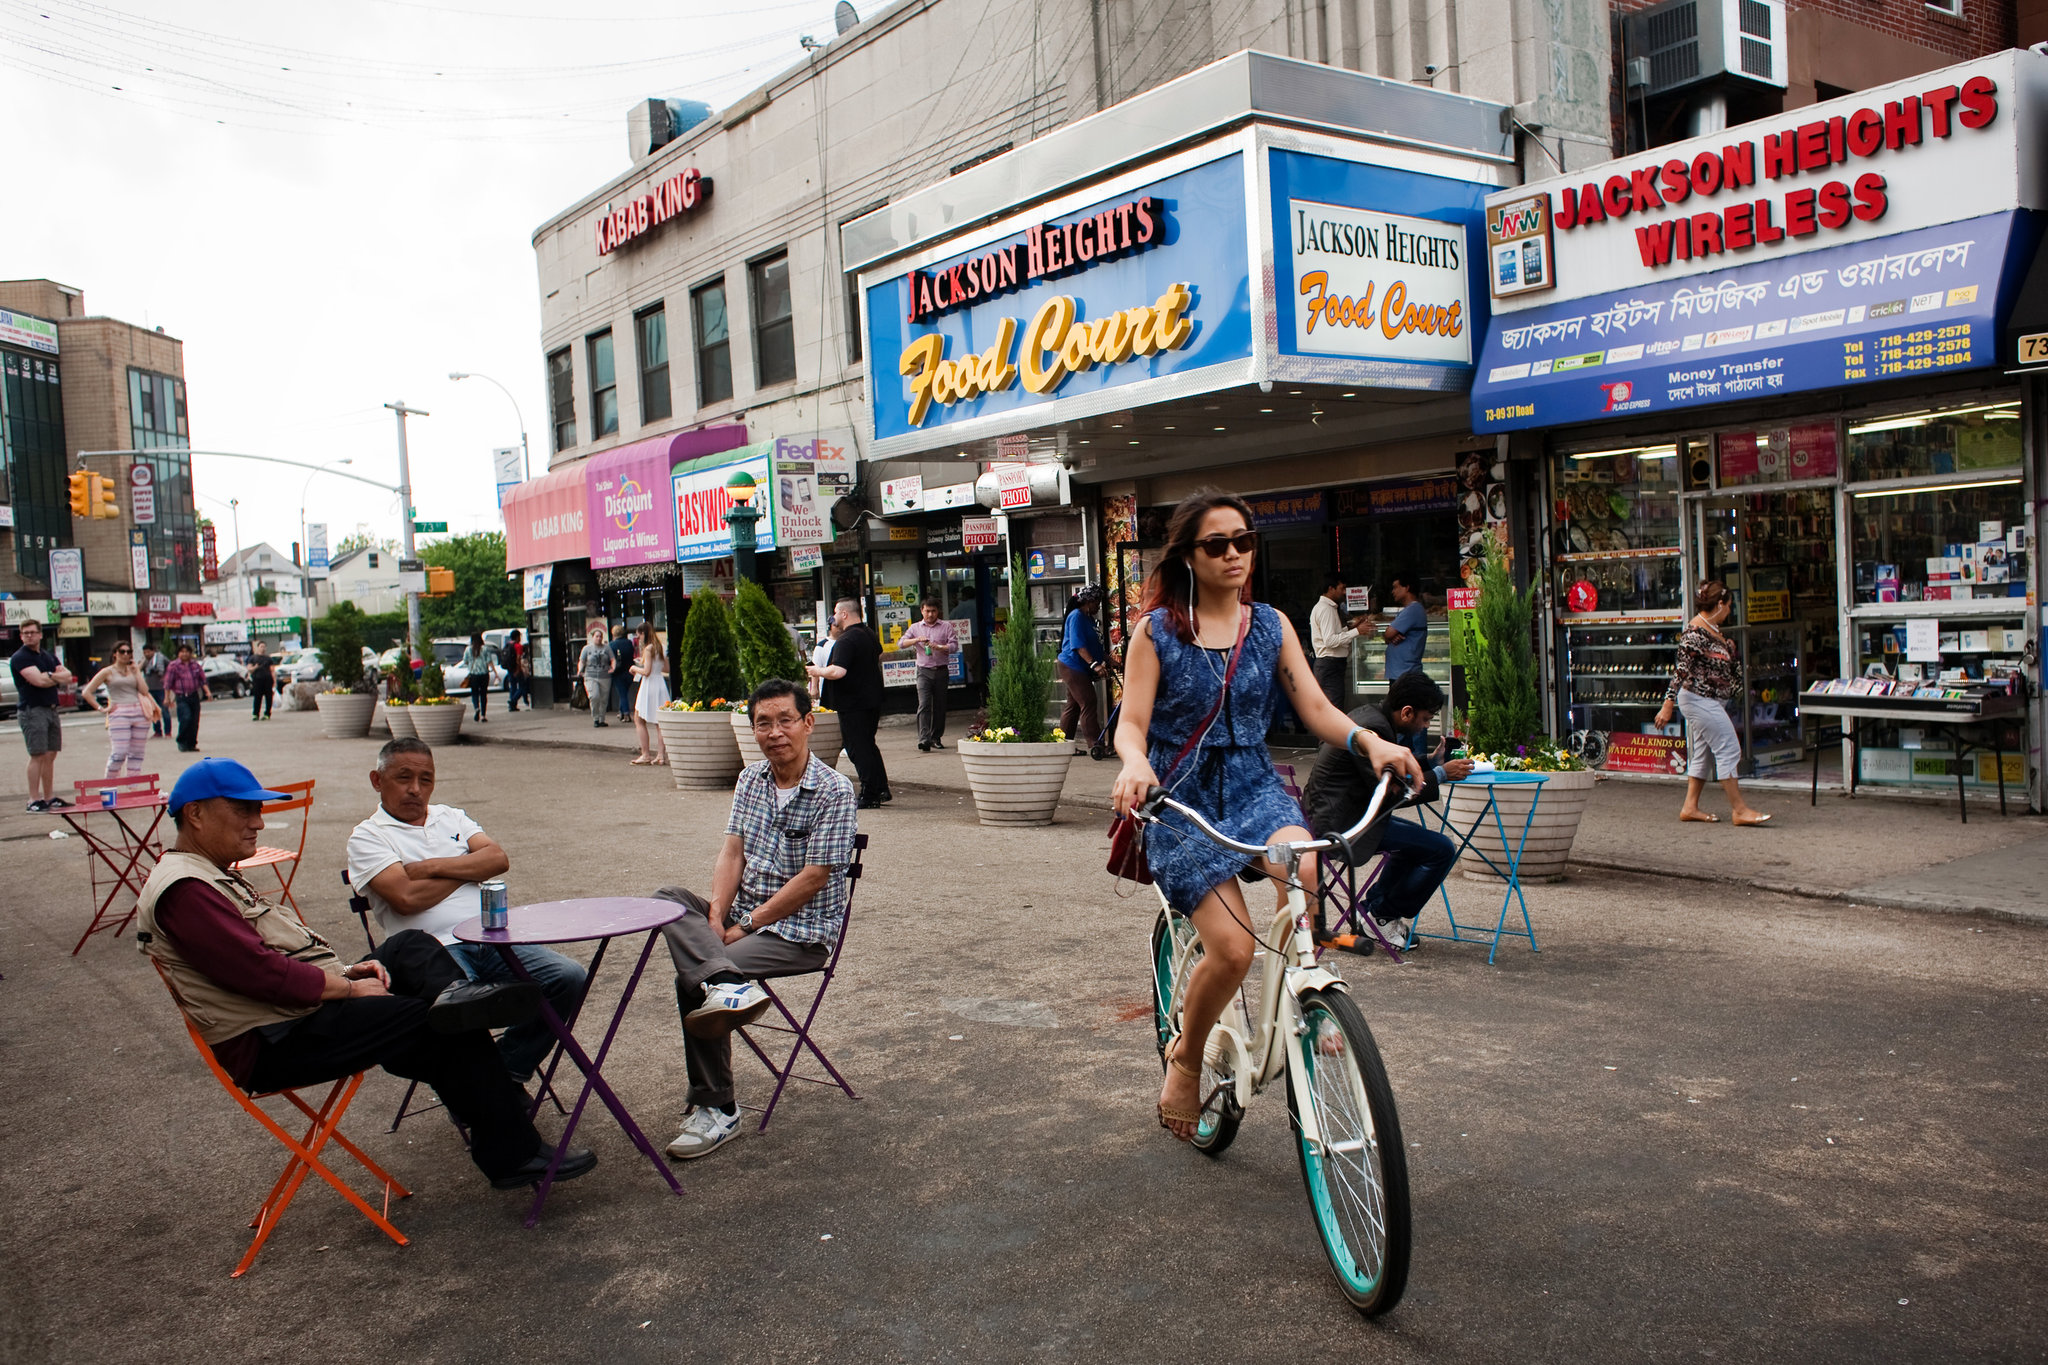 Block by Block | Jackson Heights - Video - NYTimes.com